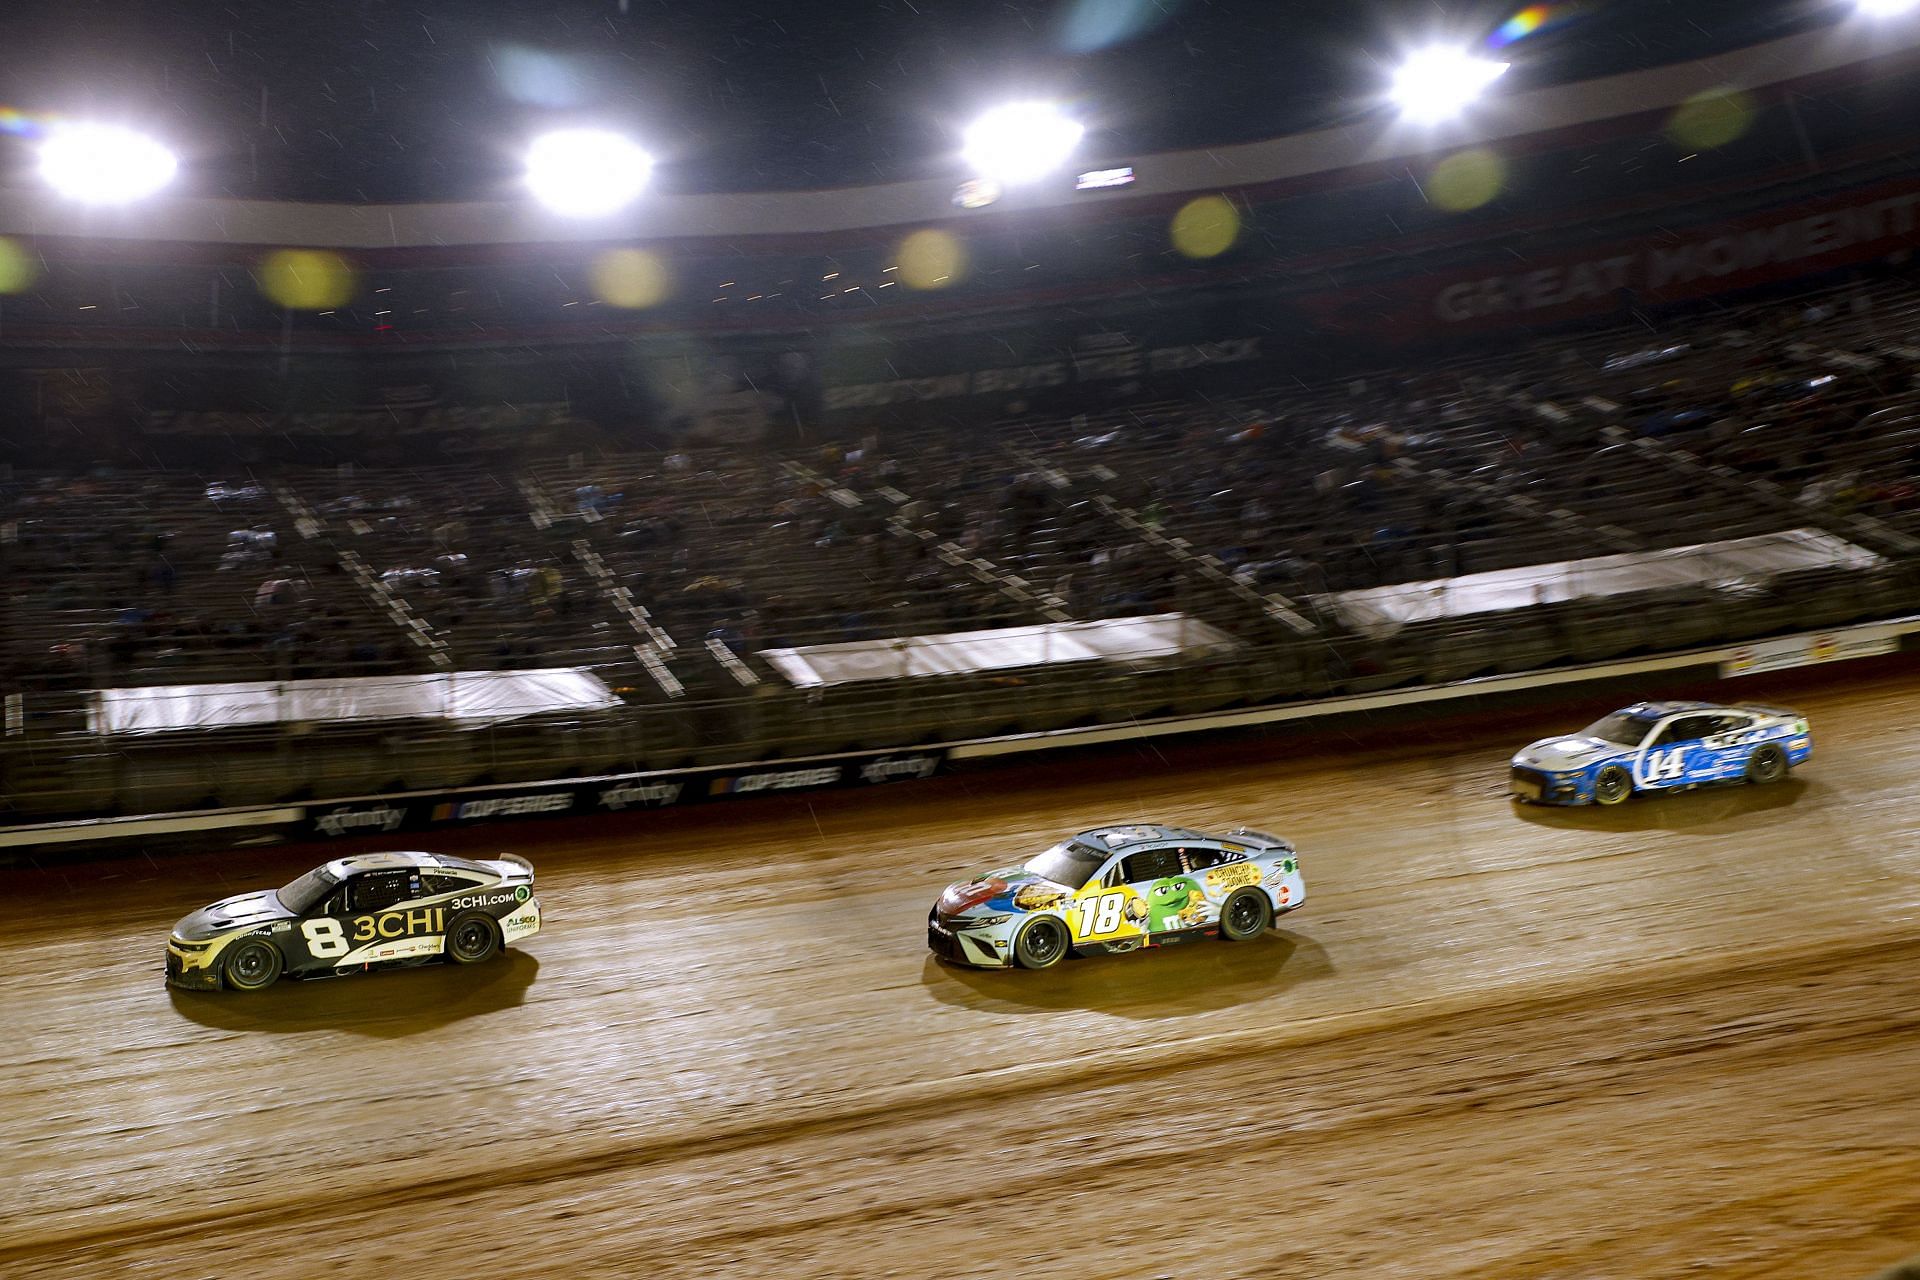 Tyler Reddick, Kyle Busch and Chase Briscoe race during the 2022 NASCAR Cup Series Food City Dirt Race at Bristol Motor Speedway in Tennessee. (Photo by Chris Graythen/Getty Images)